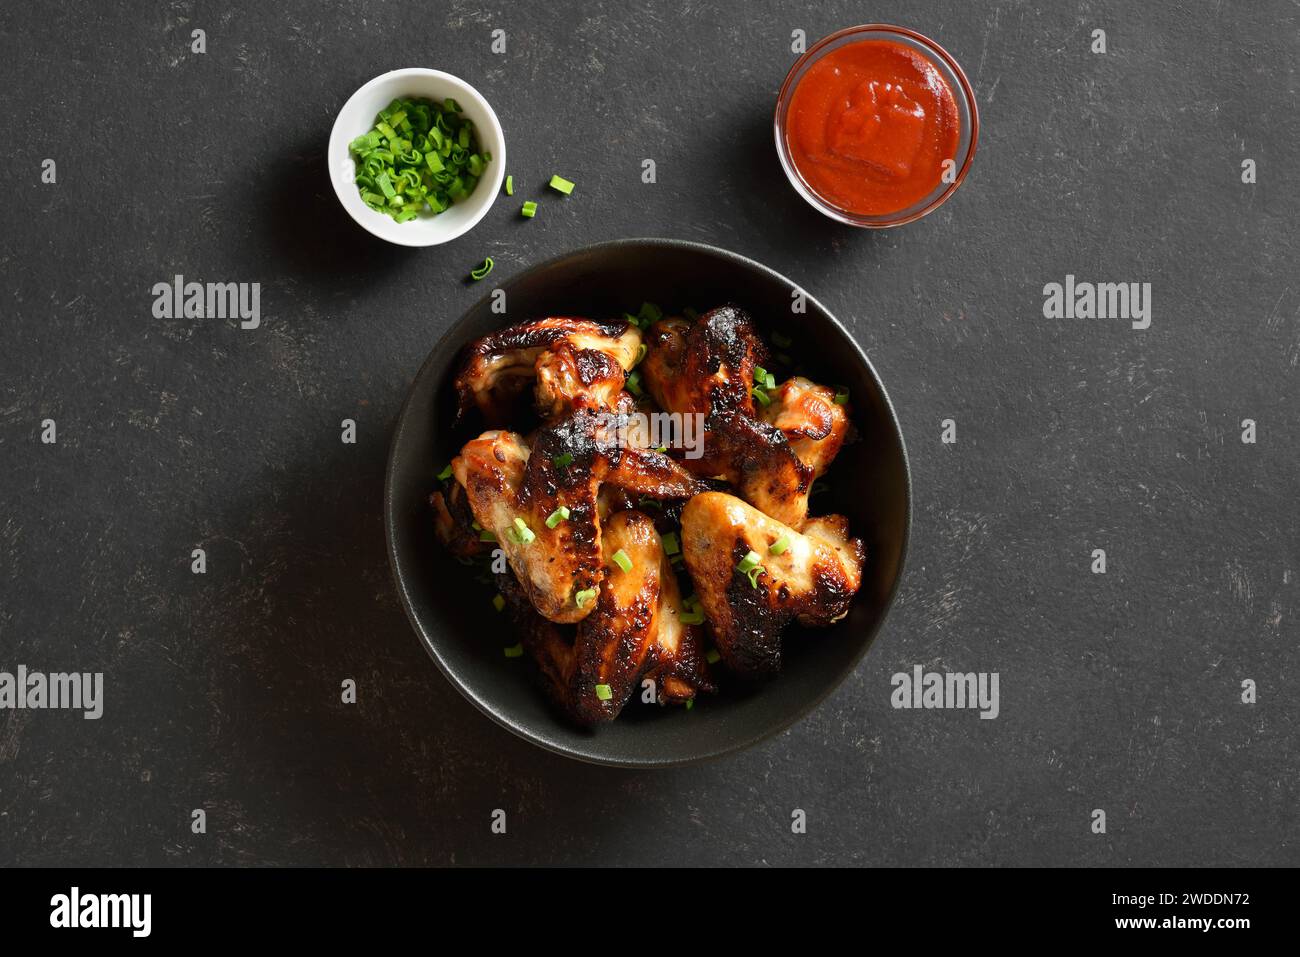 Grilled chicken wings in bowl over dark stone background. Tasty bbq chicken for dinner. Top view, flat lay Stock Photo